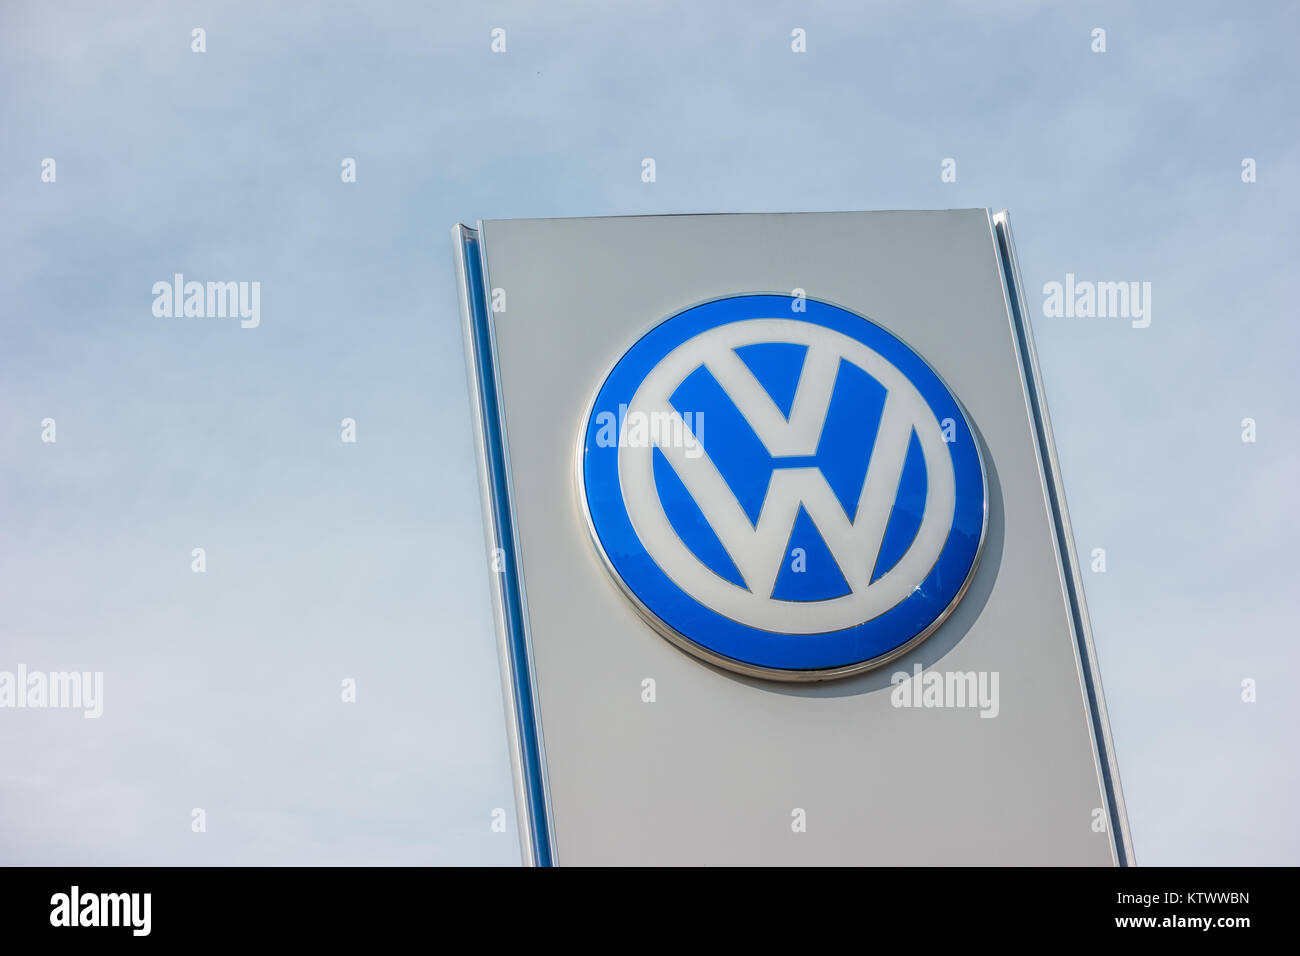 Volkswagen sign against cloudy sky. Volkswagen is the biggest German automaker and the third largest automaker in the world Stock Photo